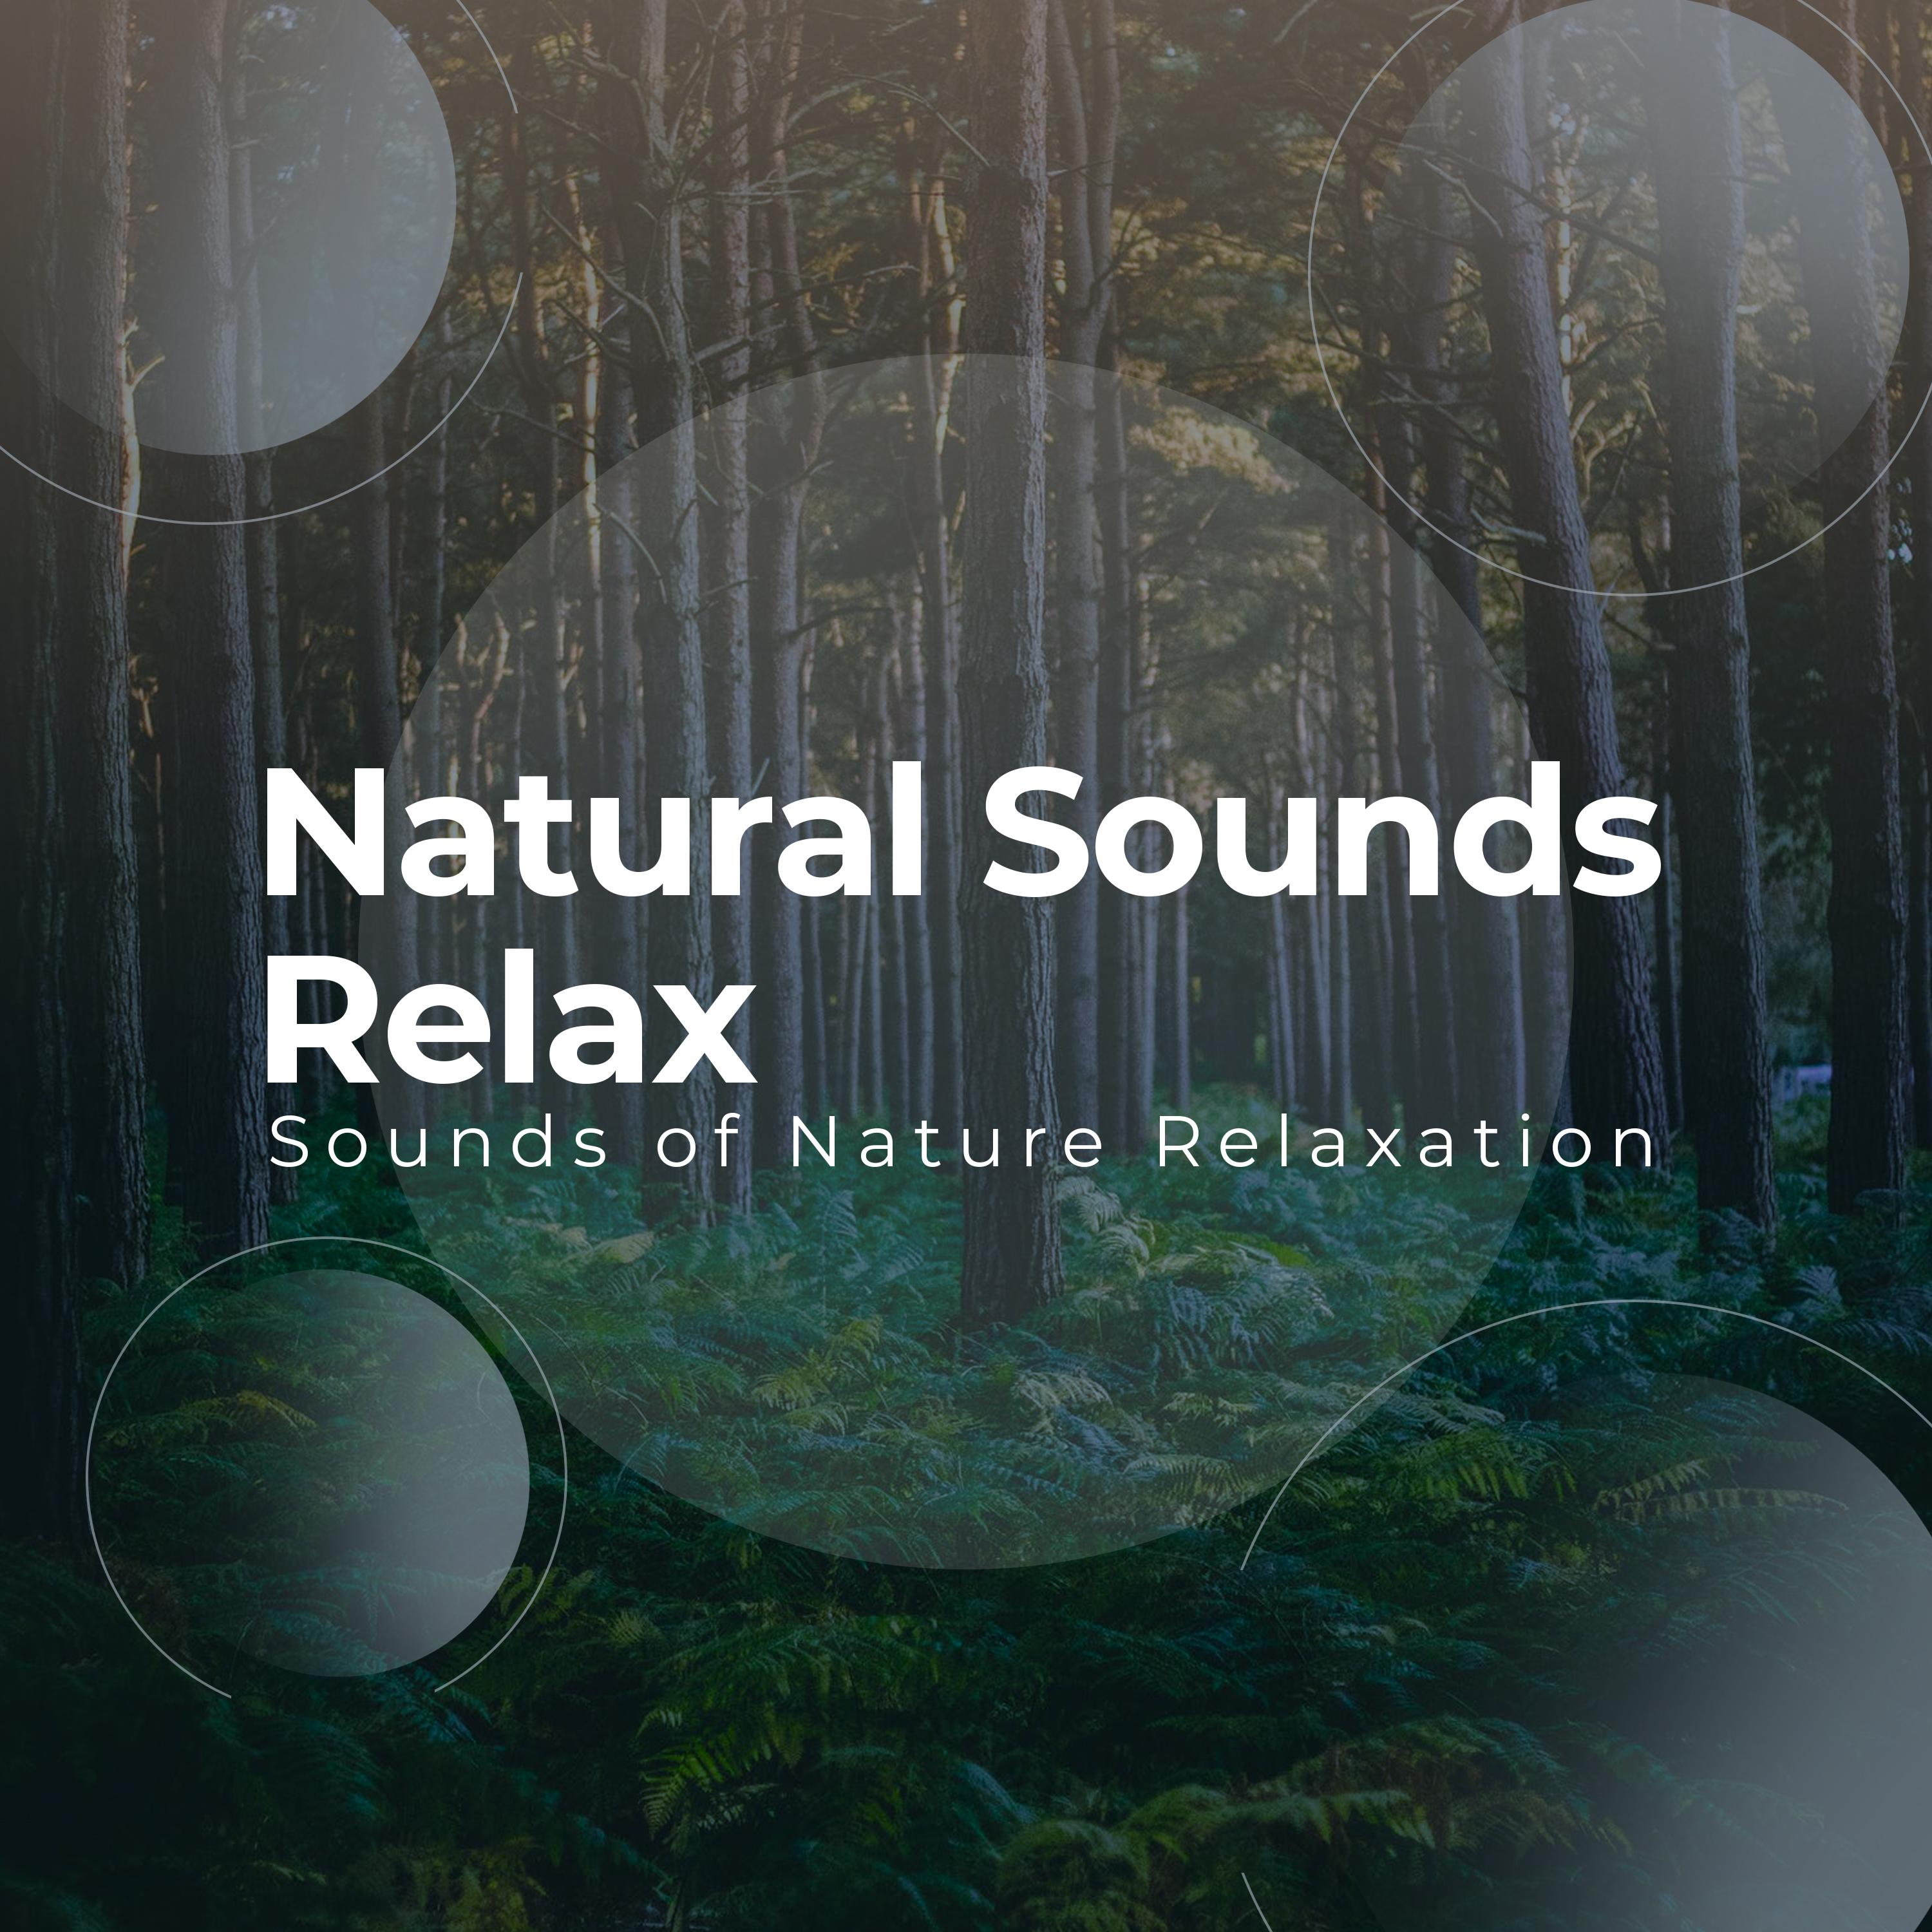 Natural Sounds: Relax